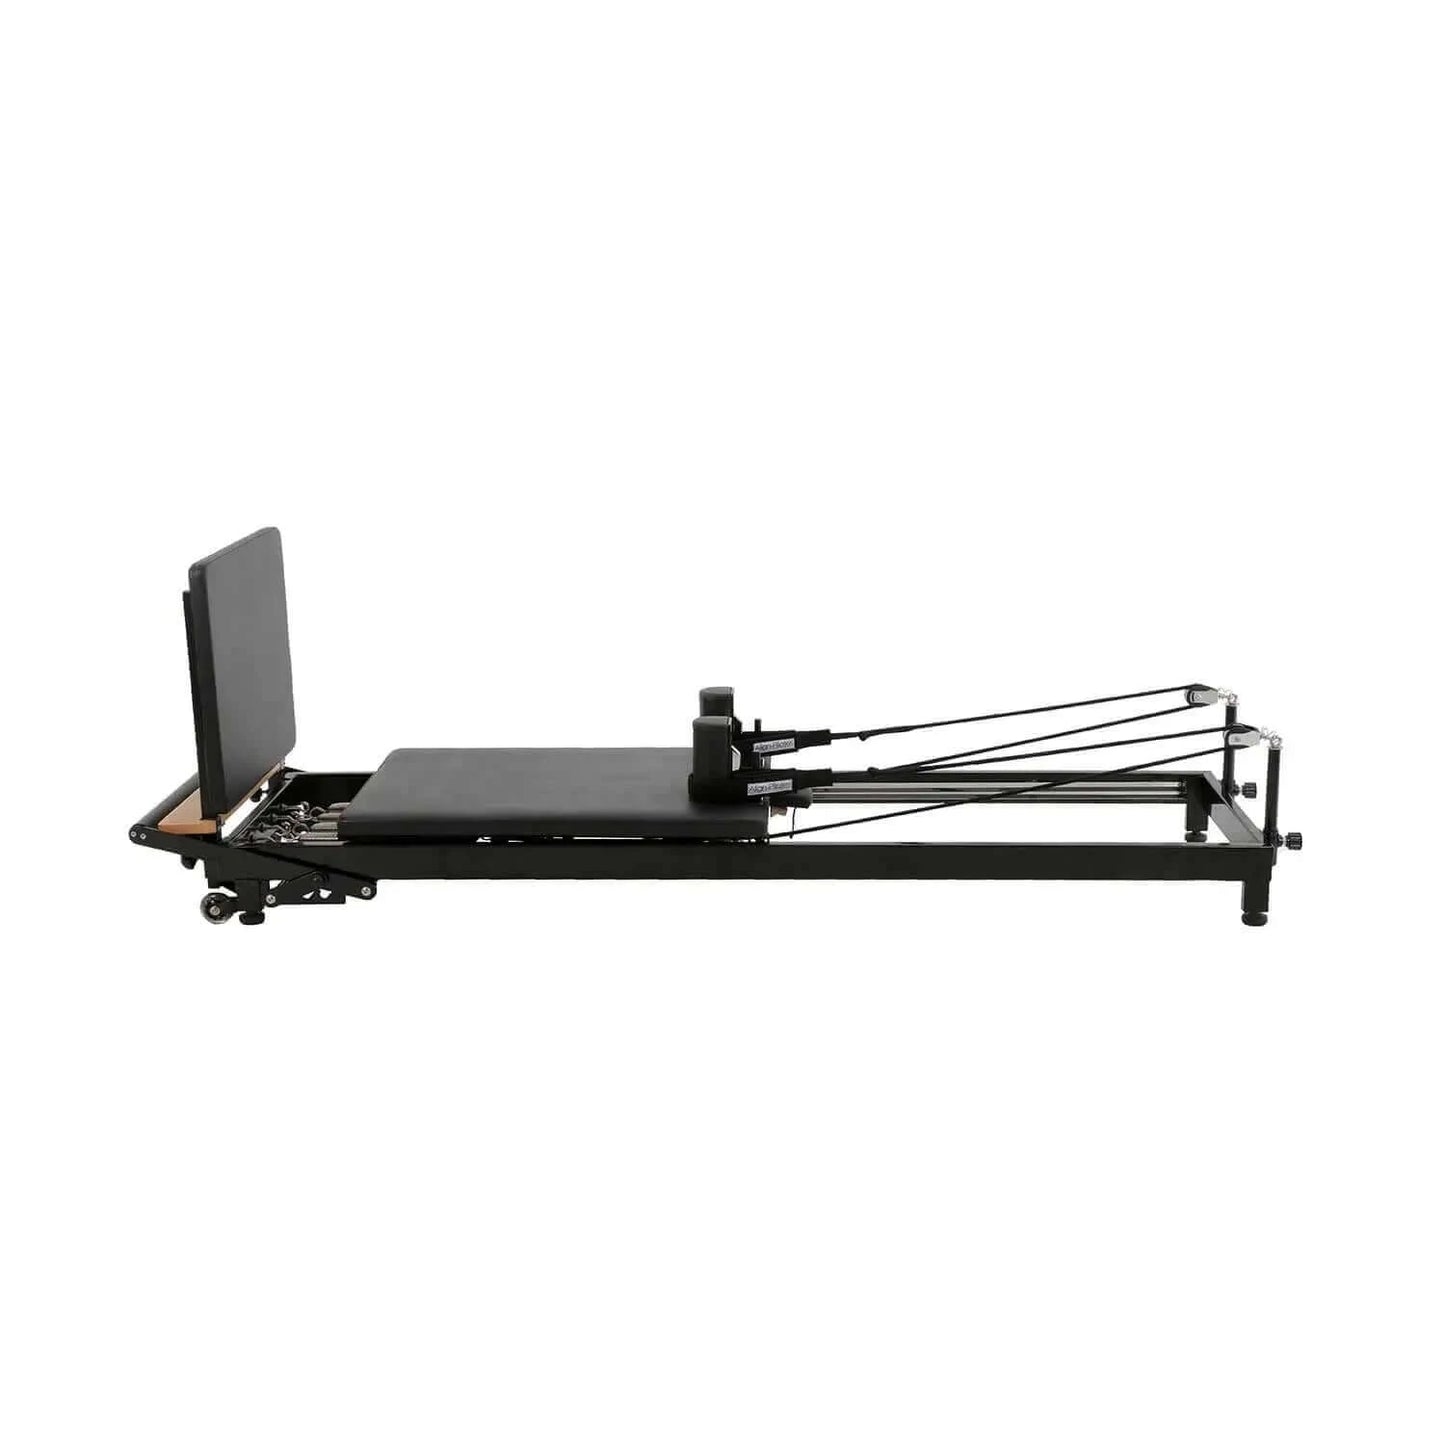  Align Pilates H1 Home Reformer Machine by Align Pilates sold by Pilates Matters® by BSP LLC